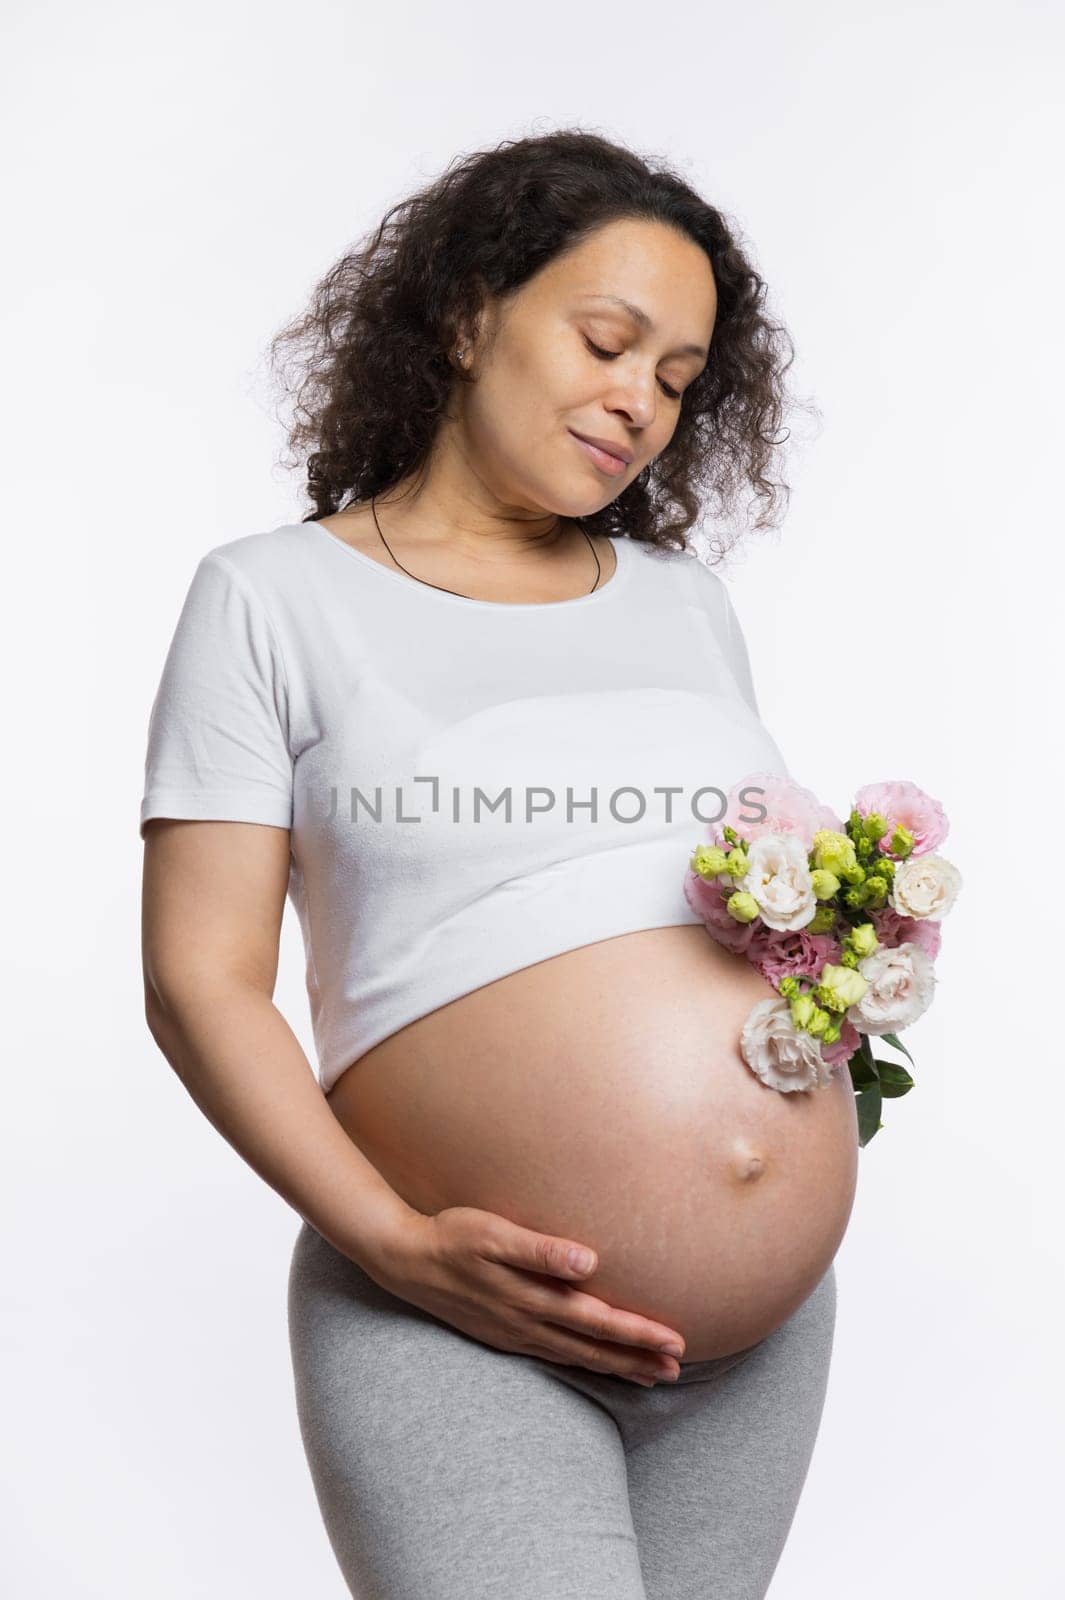 Pregnancy. Motherhood. Mother's Day concept. Beautiful pregnant woman with bunch of flowers, holding hand on her naked belly abdomen, isolated white background. Expectant mother waiting for baby birth